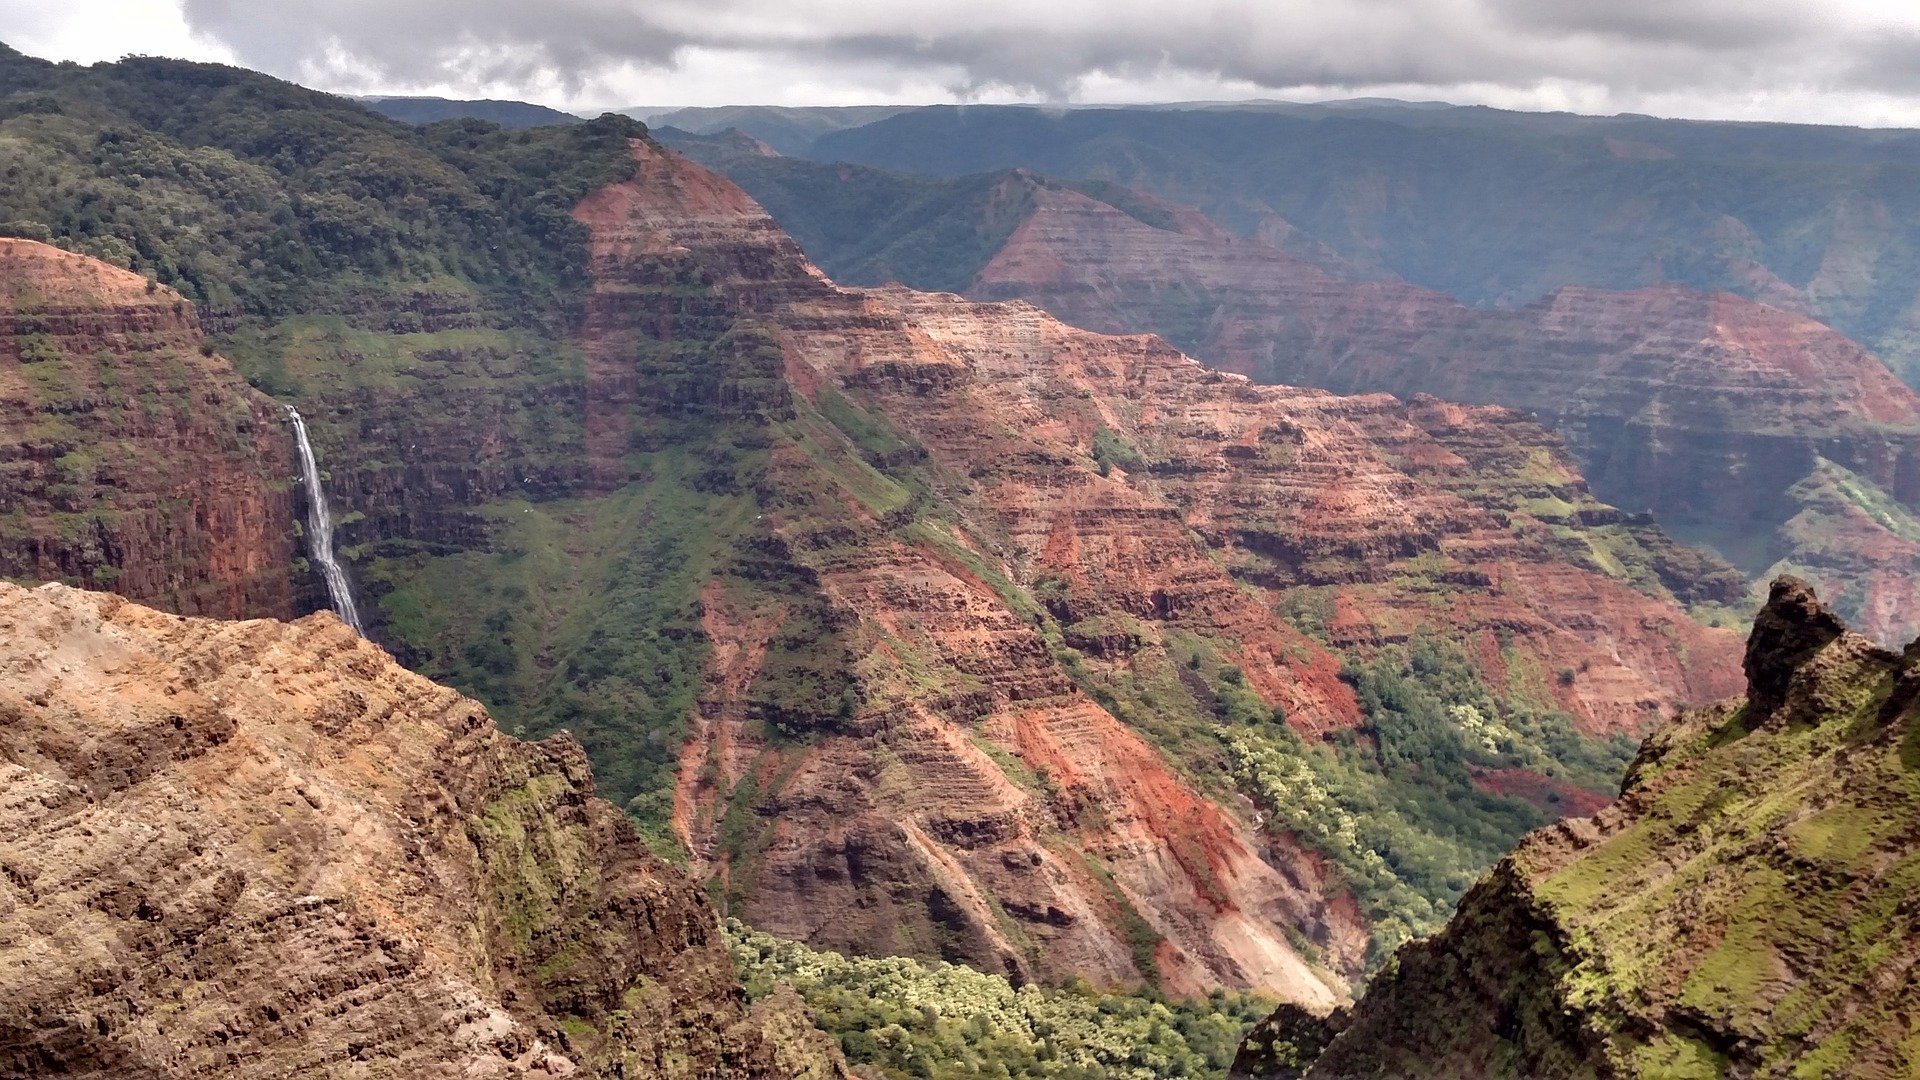 5 Ultimate Things to Do When Visiting Hawaii